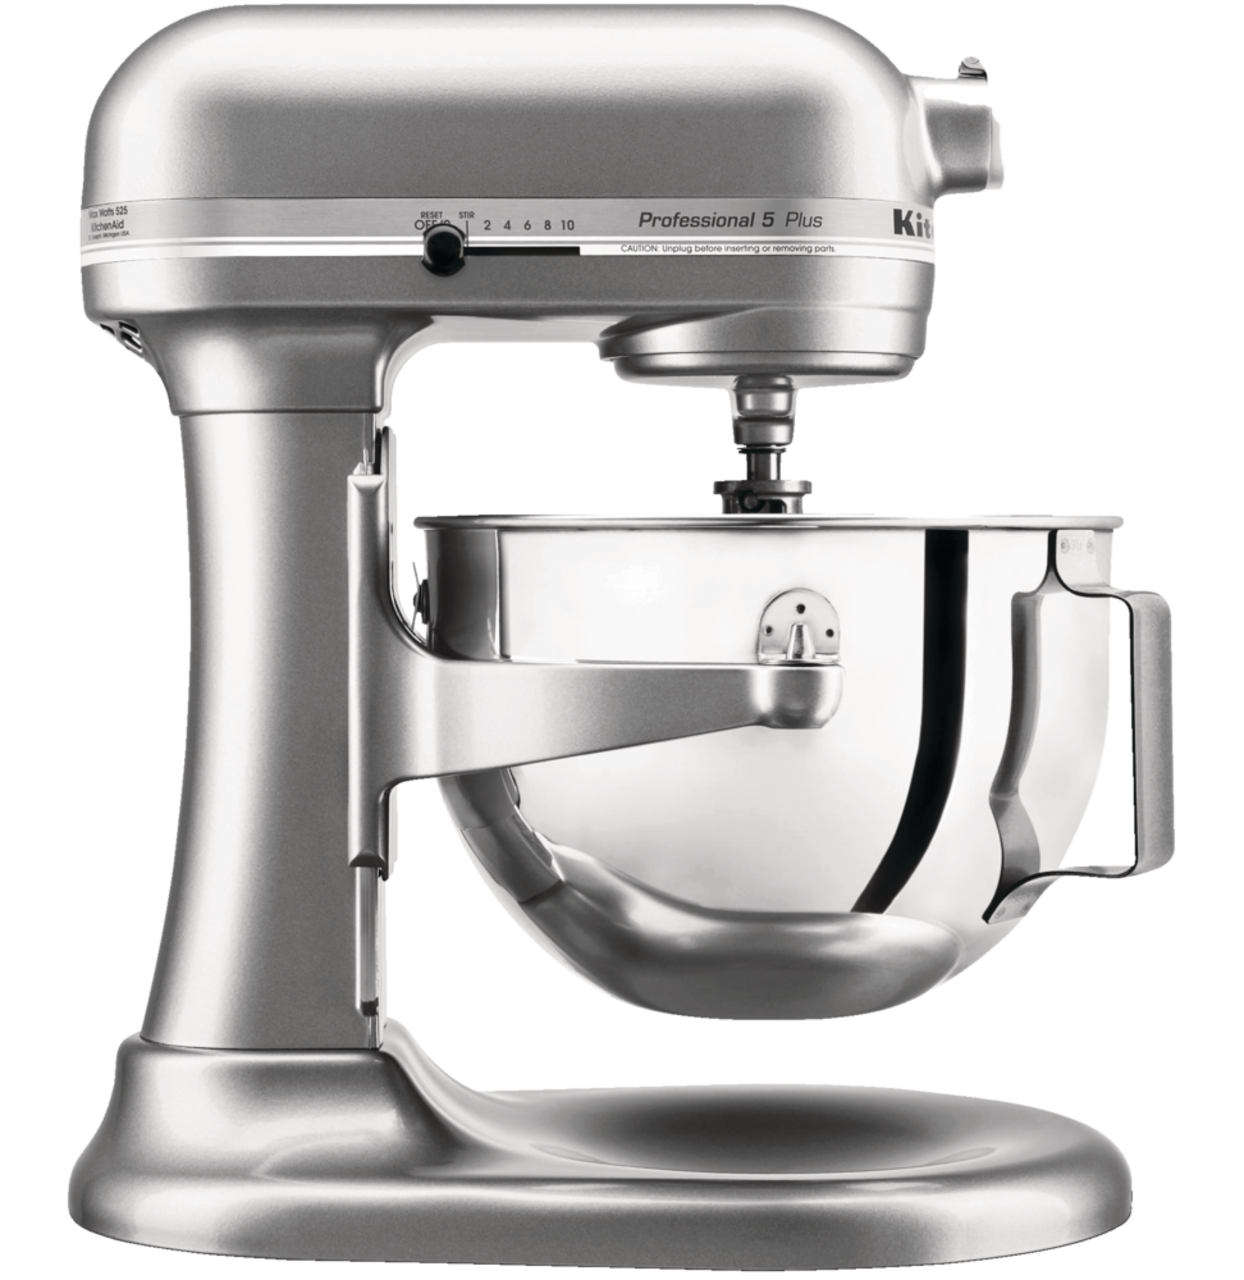 https://media-www.canadiantire.ca/product/living/kitchen/kitchen-appliances/0432786/kitchenaid-pro-5-stand-mixer-contour-silver-52f13ad9-8517-473c-a38b-3ce61a804e16.png?imdensity=1&imwidth=640&impolicy=mZoom